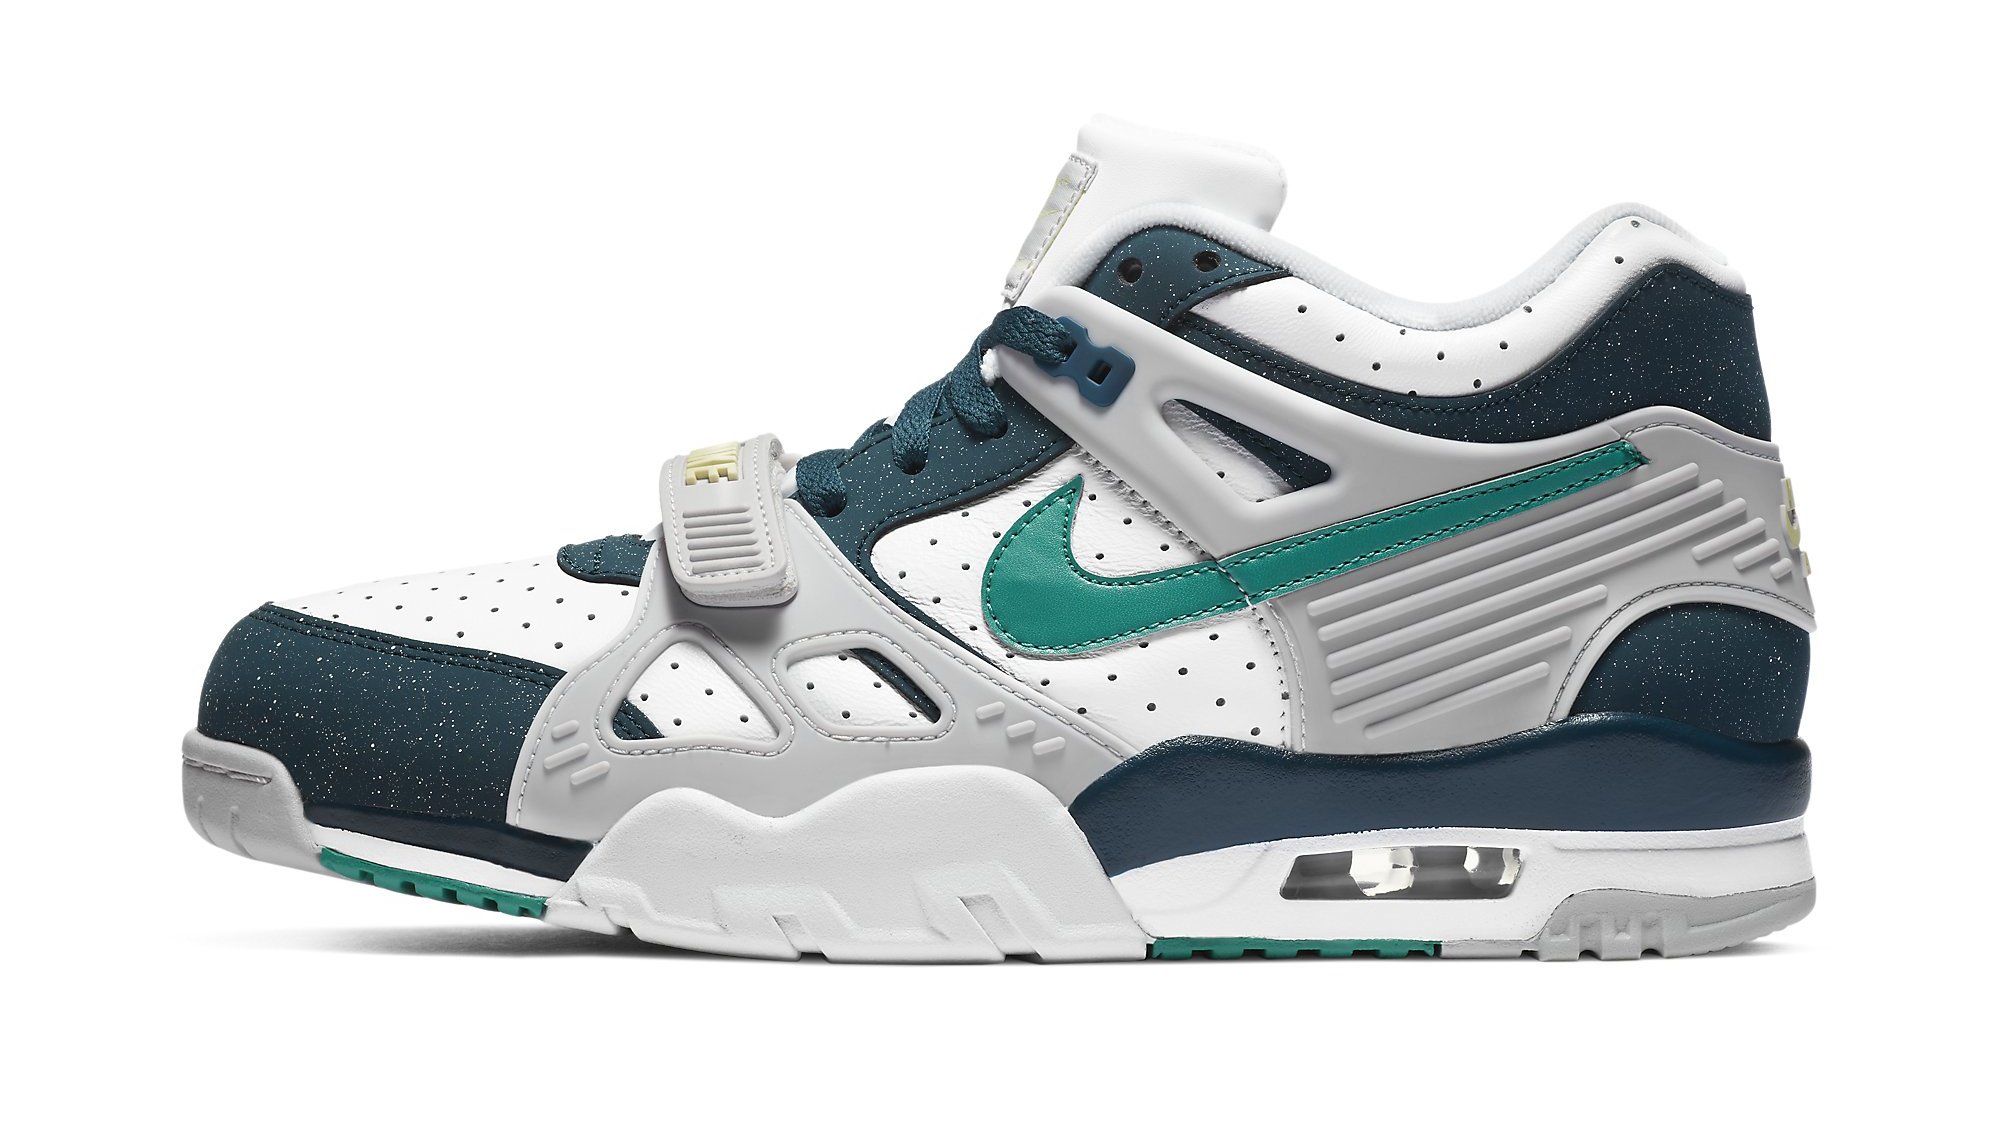 Nike Air Trainer 3 CZ3568 100 Lateral